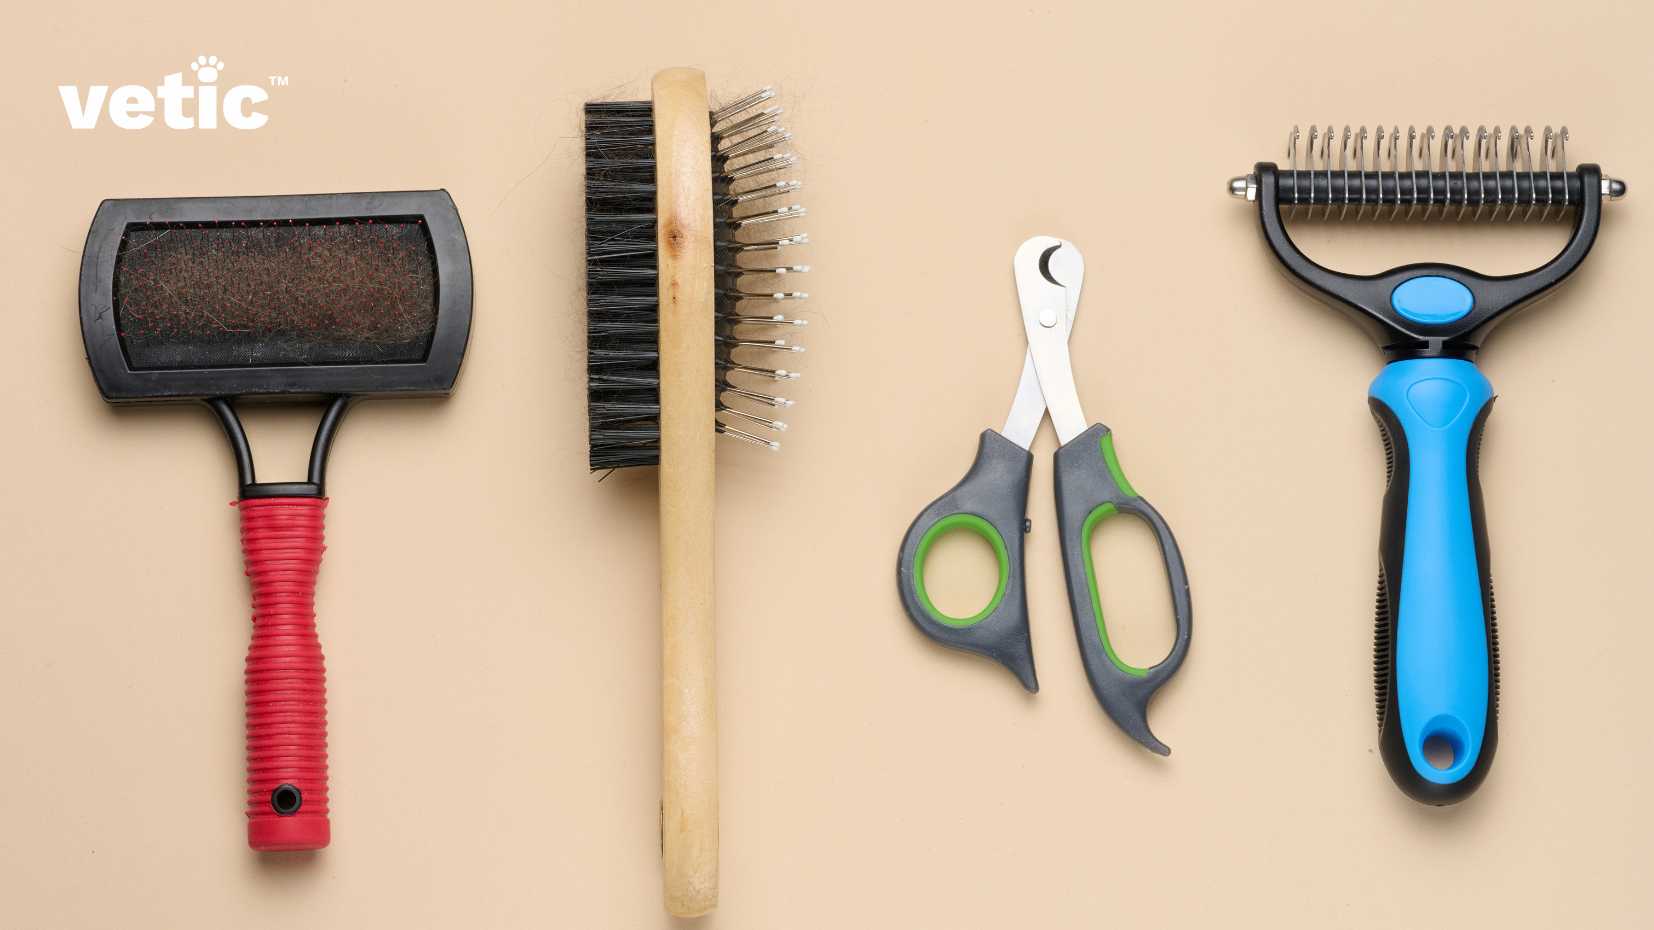 This is an image of everything you will need to groom your short-haired cat at home. from left to right - there's a black slicker brush with a red handle, a double sided wooden brush, a small-sized nail clipper with a safety lock and a blue handled matt remover brush. the image has a text that says “vetic™”.